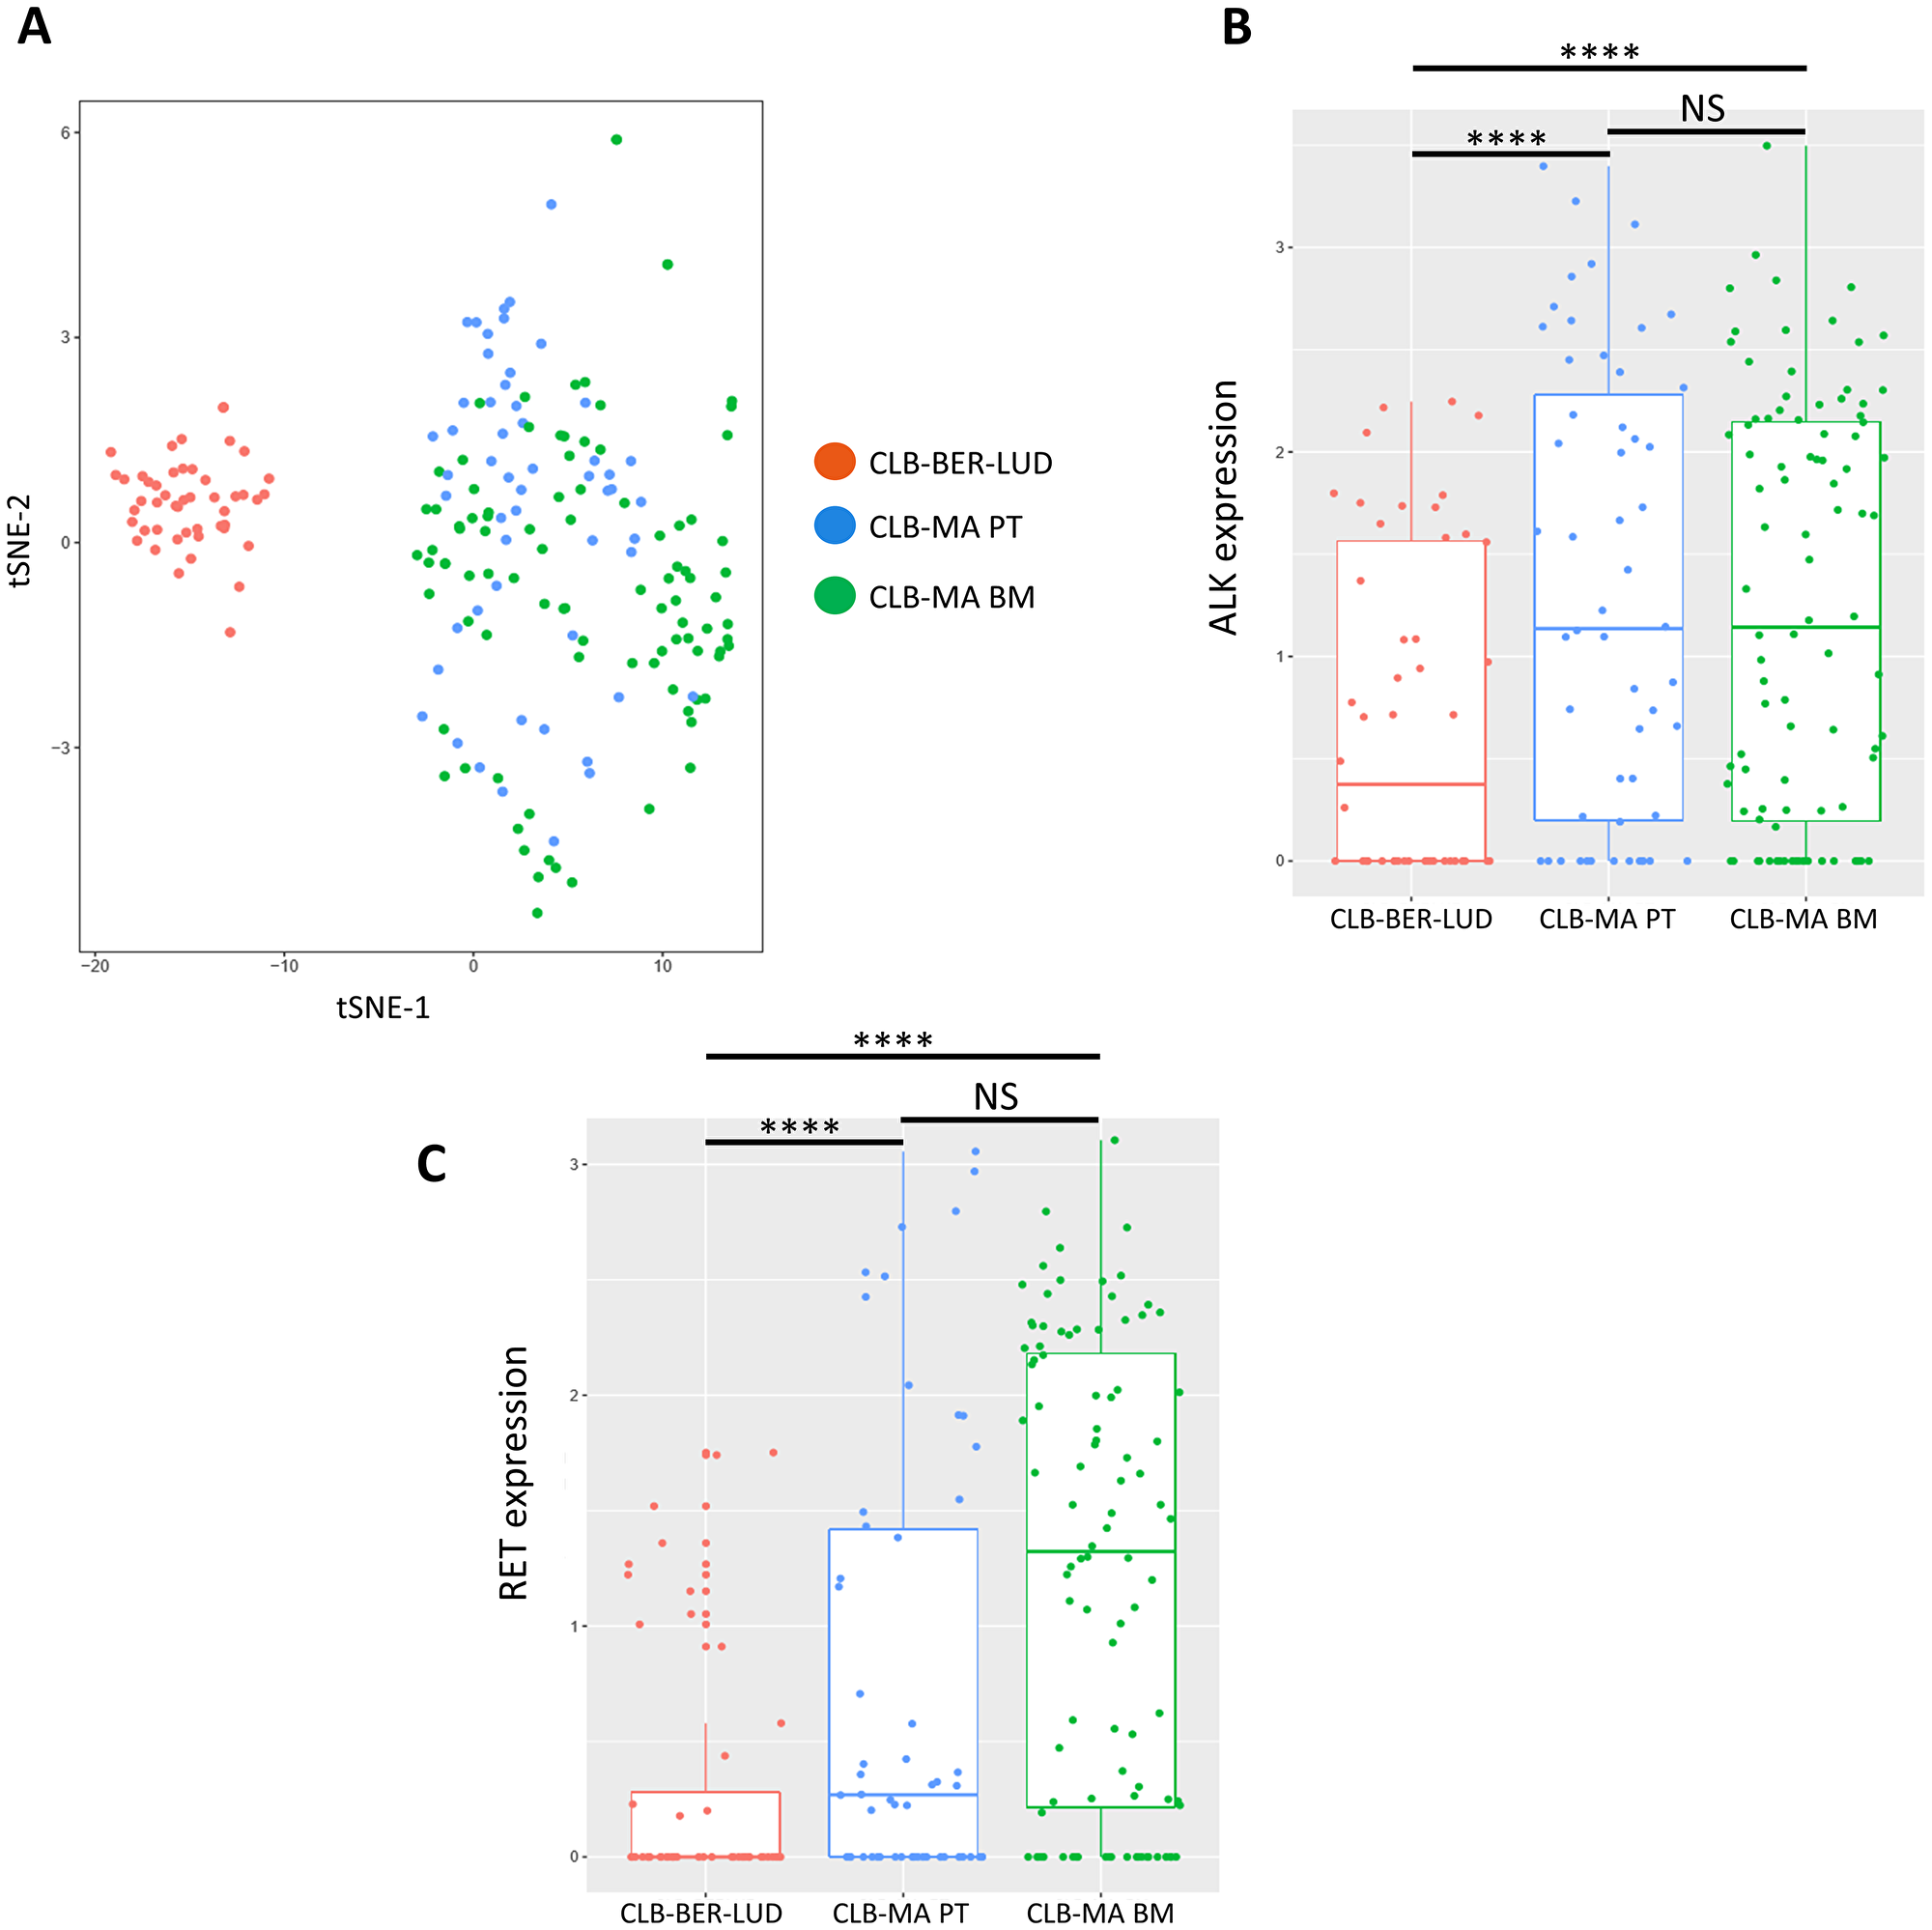 Single-cell RNA-seq analysis on CLB-MA PT and CLB-MA BM cell lines.